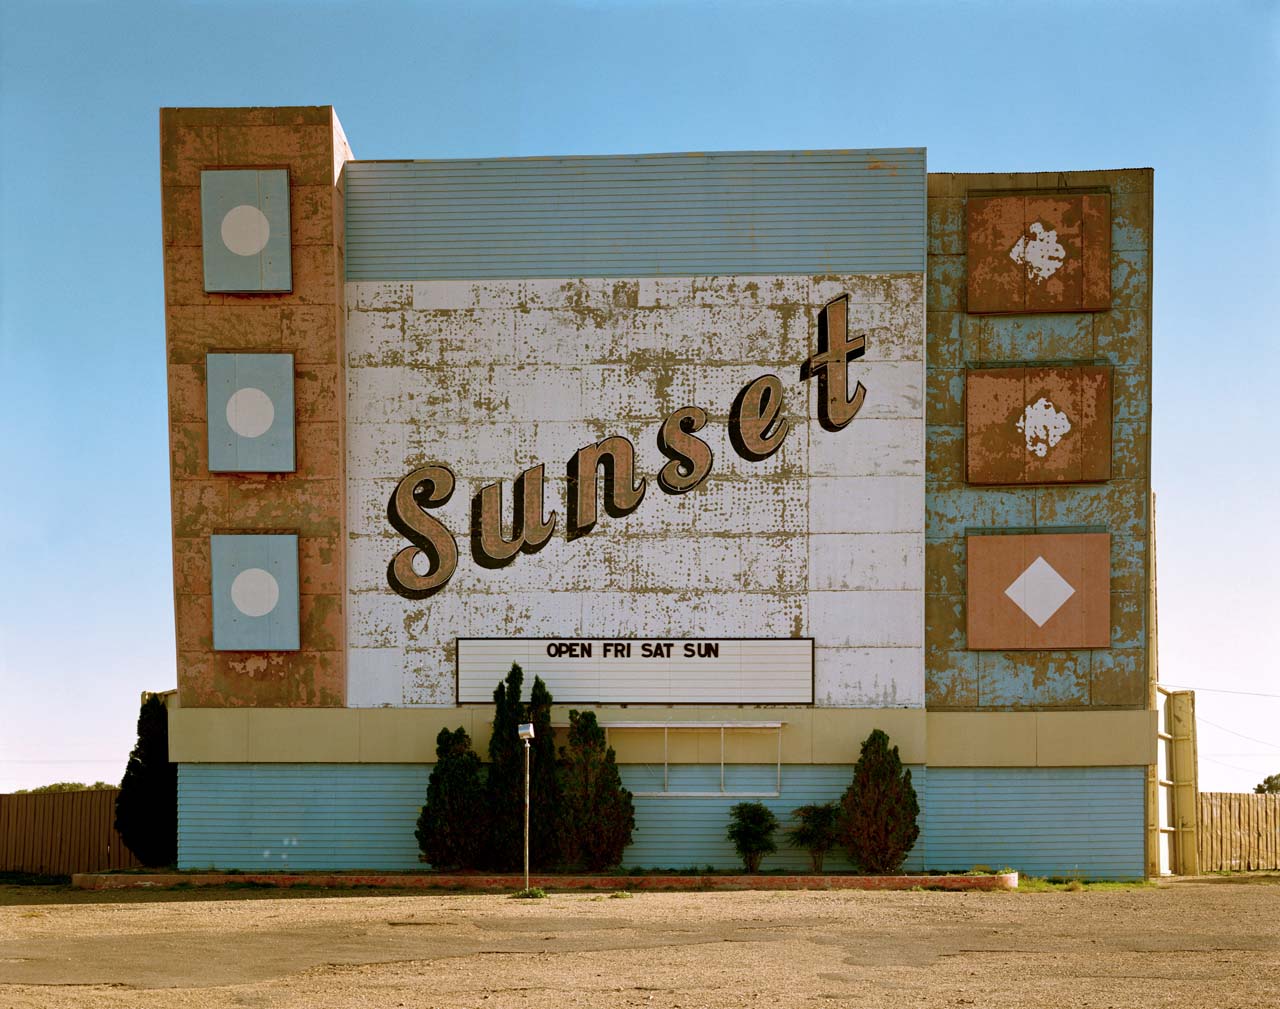 West Ninth Avenue, Amarillo, Texas, 2 October 1974.From the Uncommon Places series. © Stephen Shore. Courtesy 303 Gallery, New York.